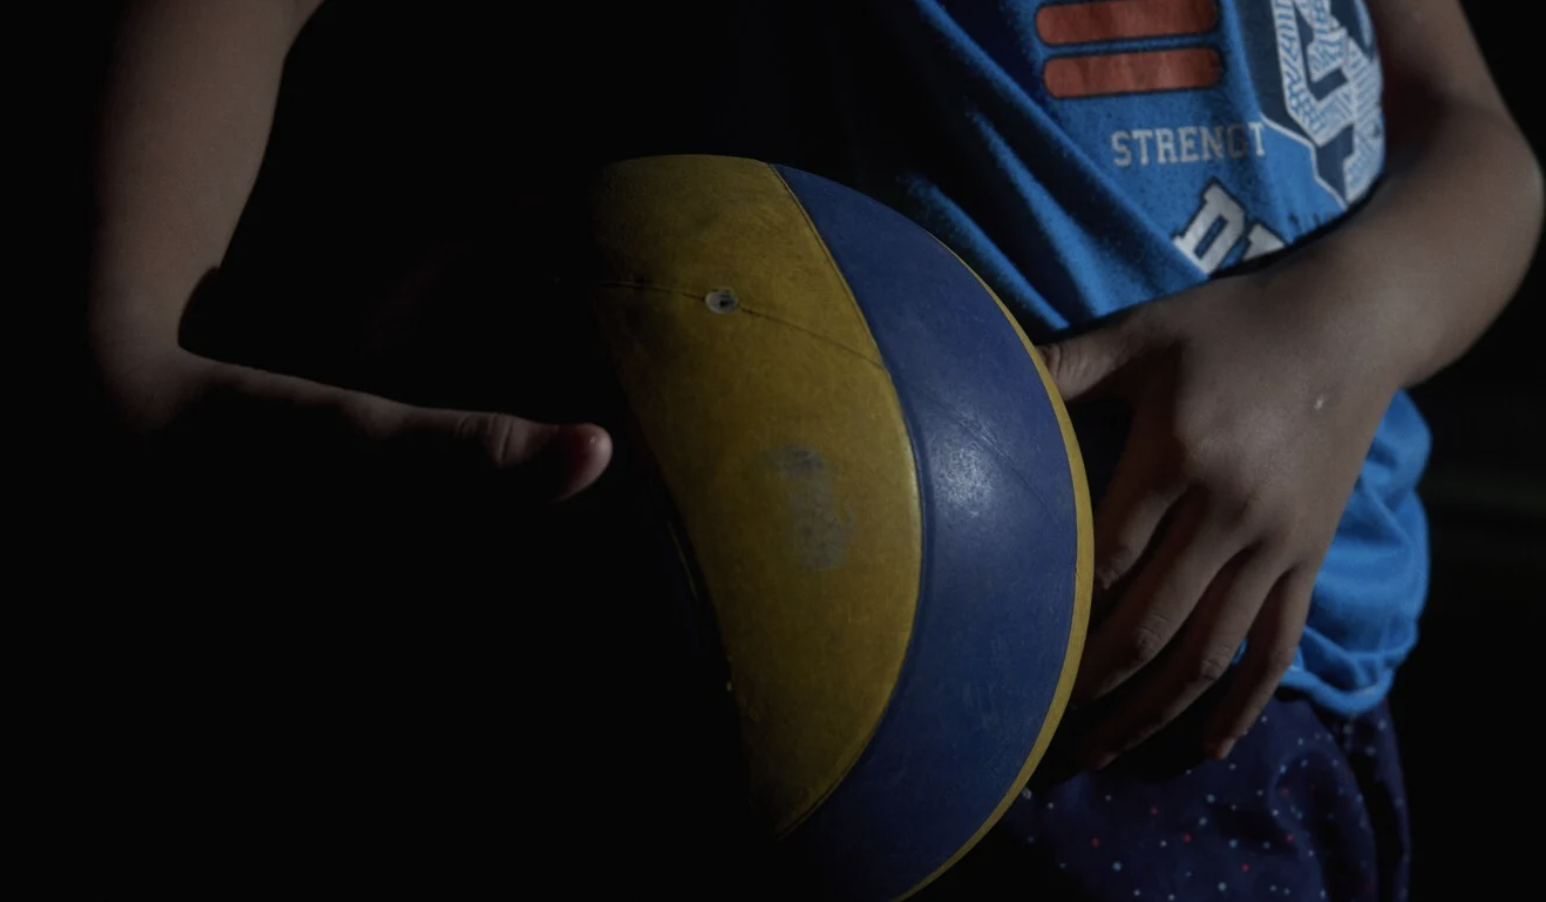 A child survivor of sexual exploitation seen holding a yellow and blue volleyball